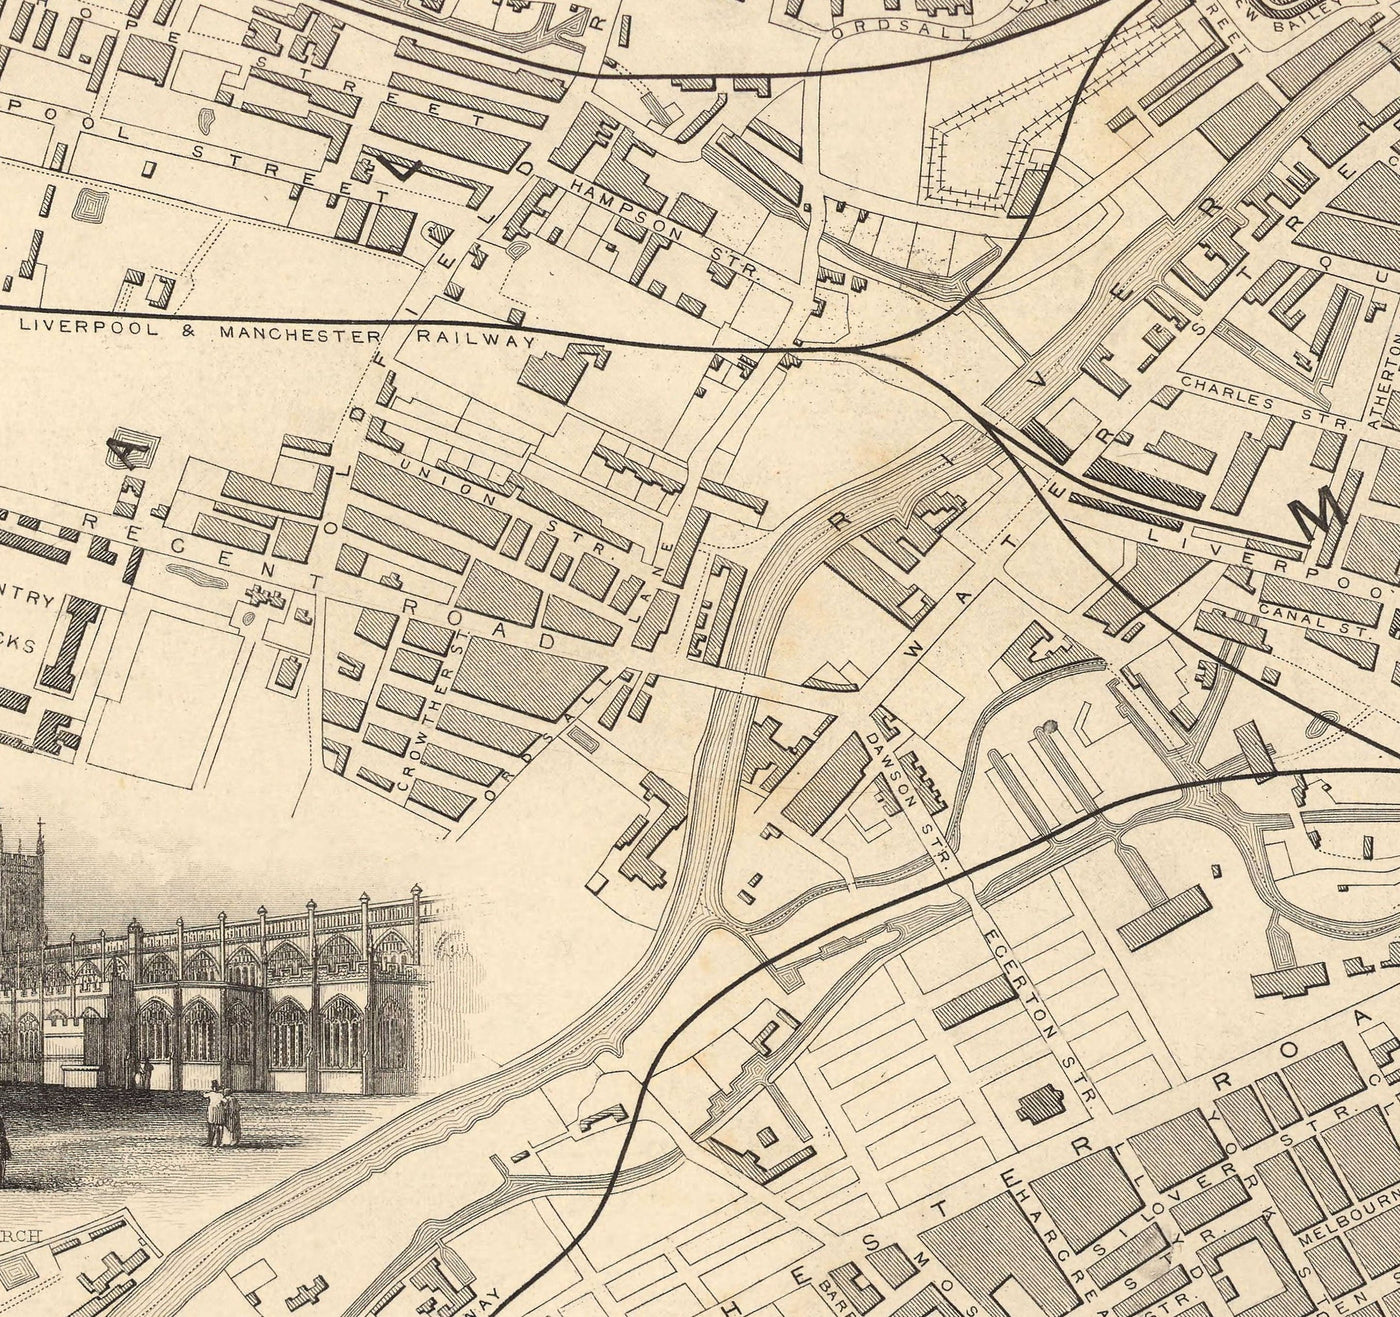 Old Map of Manchester and Environs by John Rapkin, 1851 - Town Hall, Royal Infirmary, Train Stations